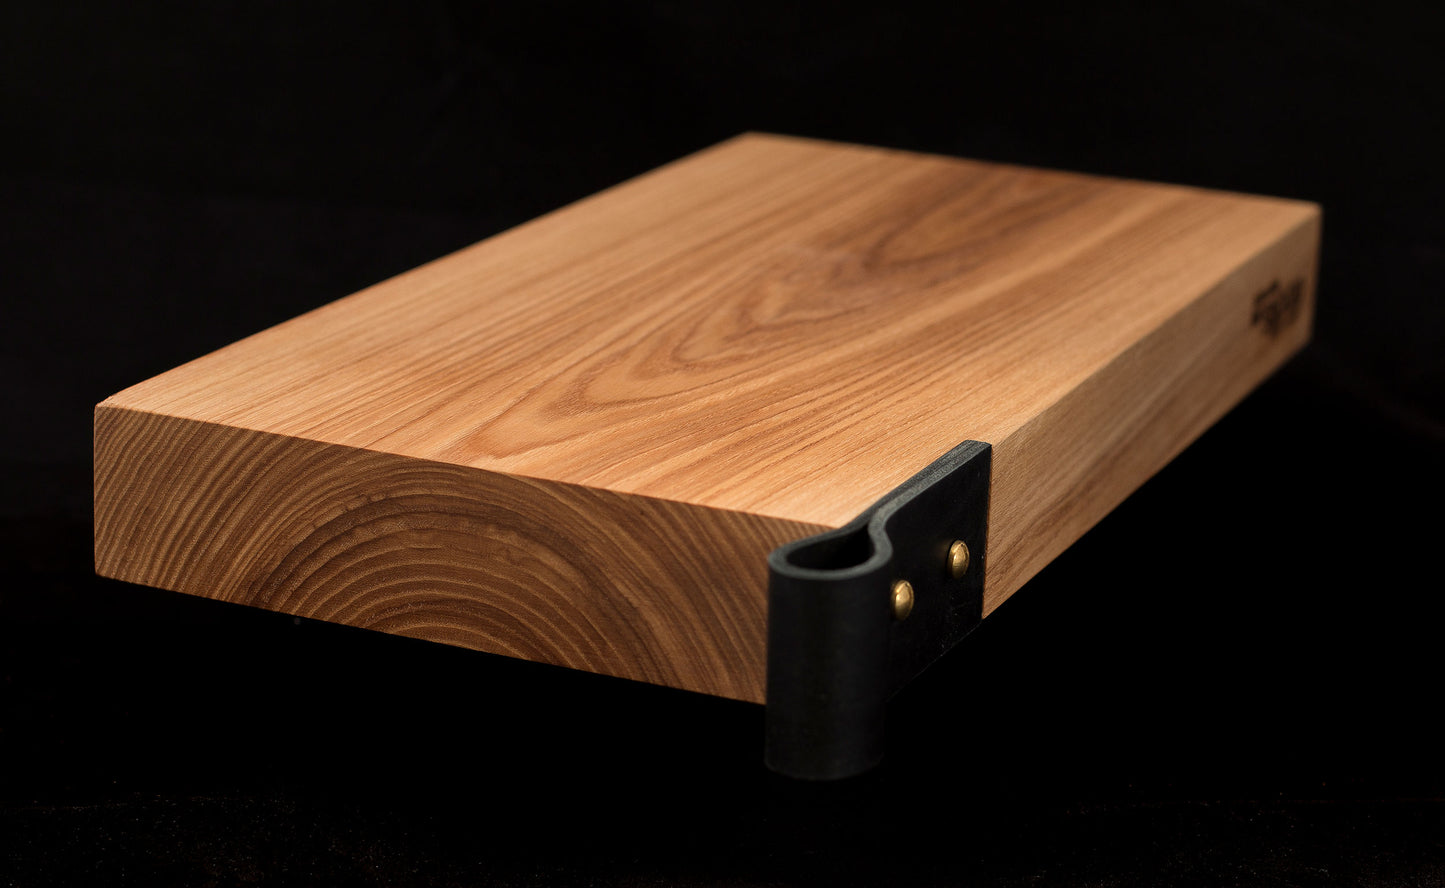 Oak board with leather handle on the sides